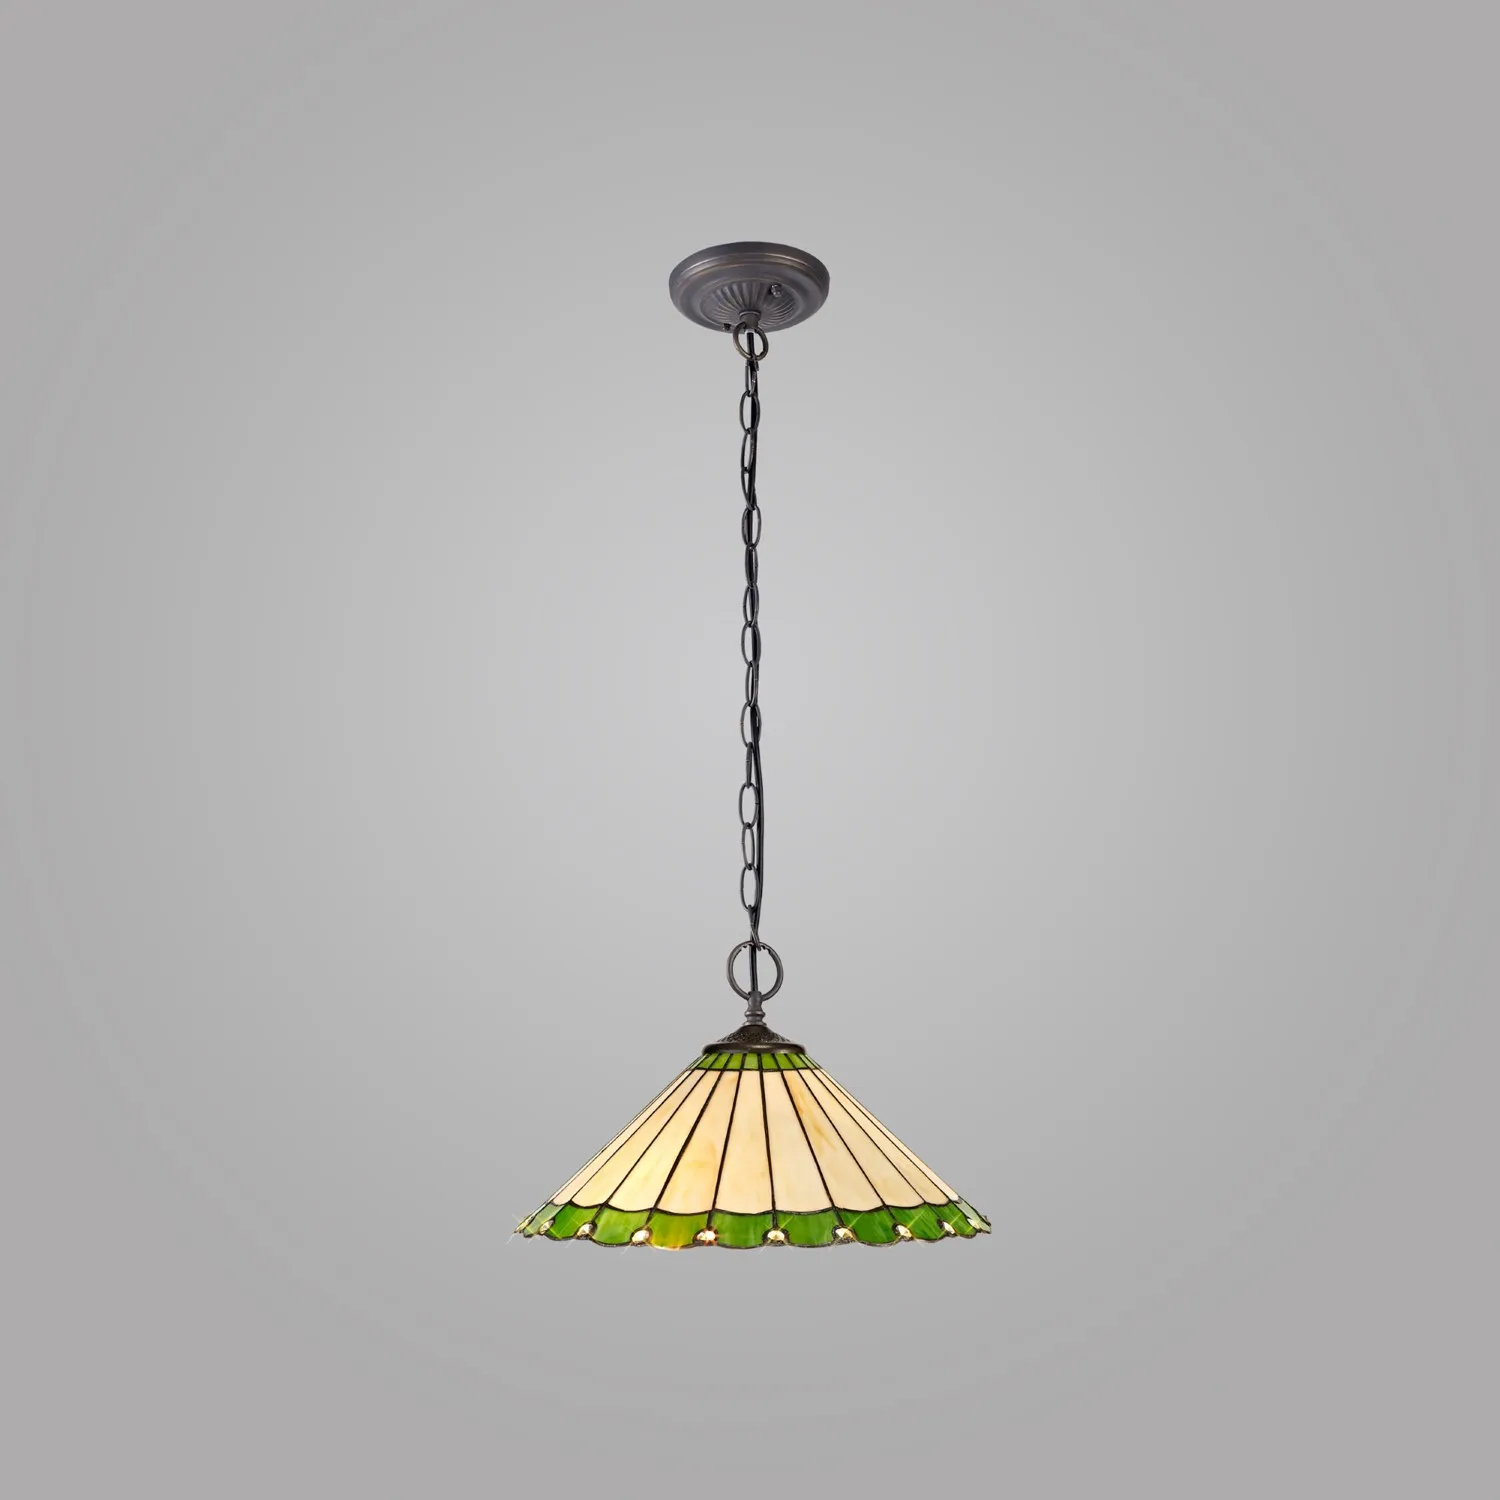 Ware 2 Light Downlighter Pendant E27 With 40cm Tiffany Shade, Green Cream Crystal Aged Antique Brass